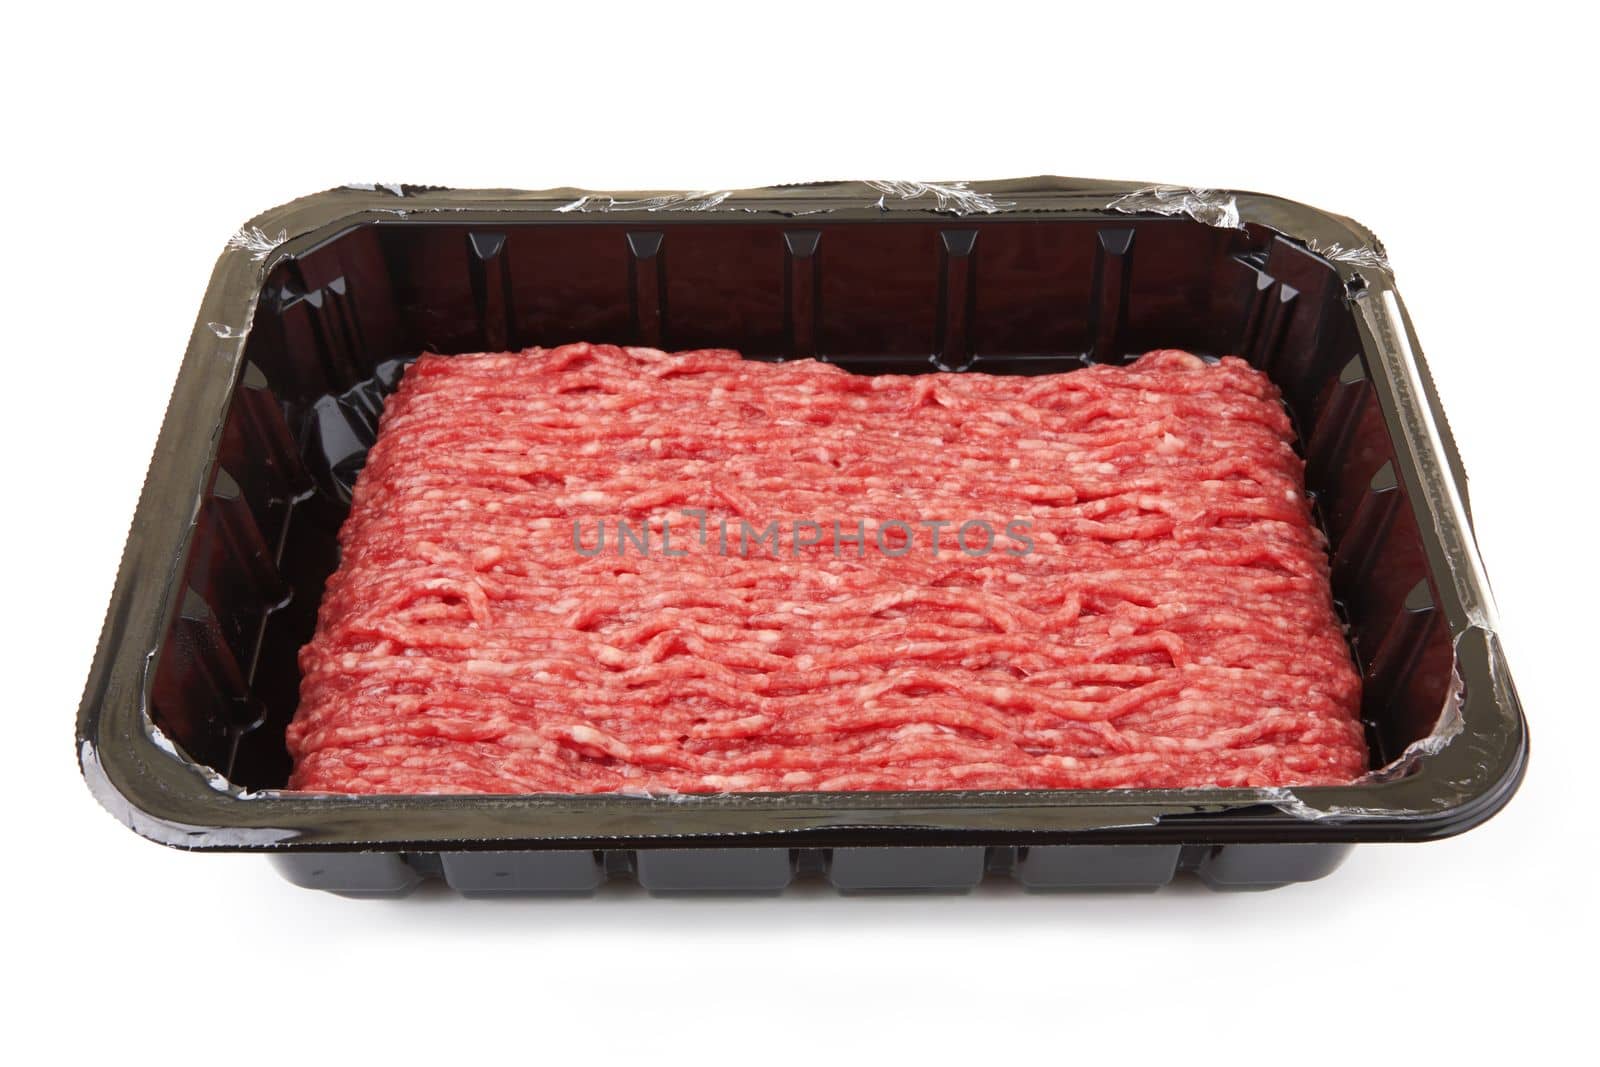 Minced meat in a plastic box isolated on a white background